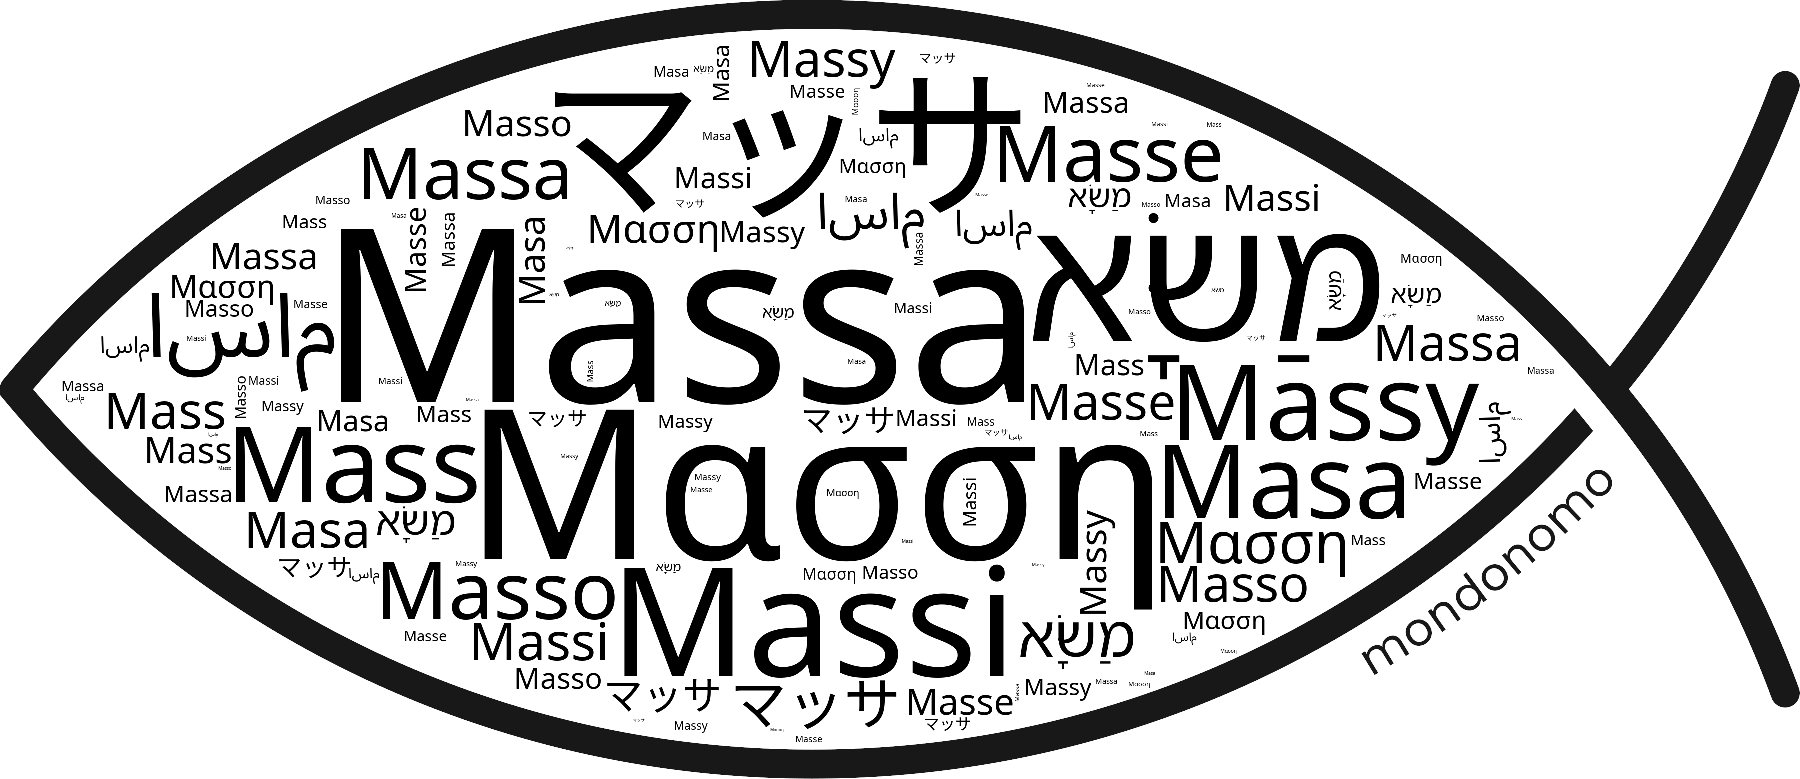 Name Massa in the world's Bibles